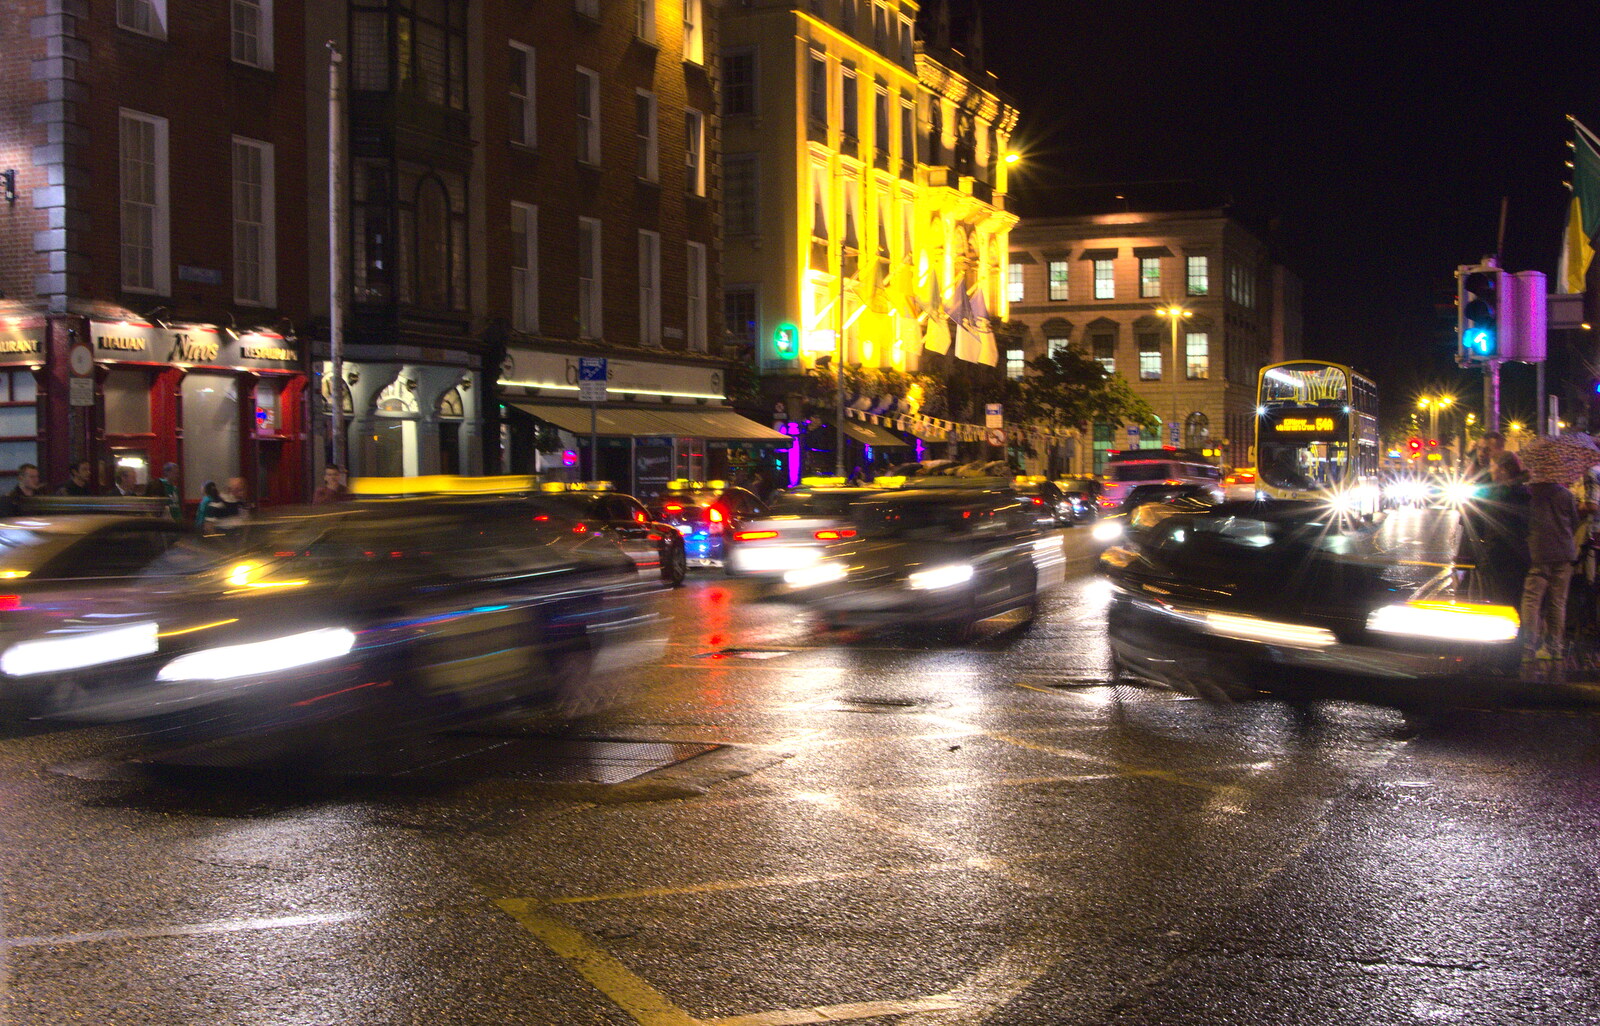 Traffic moves across a junction from A Night Out in Dublin, County Dublin, Ireland - 9th August 2014